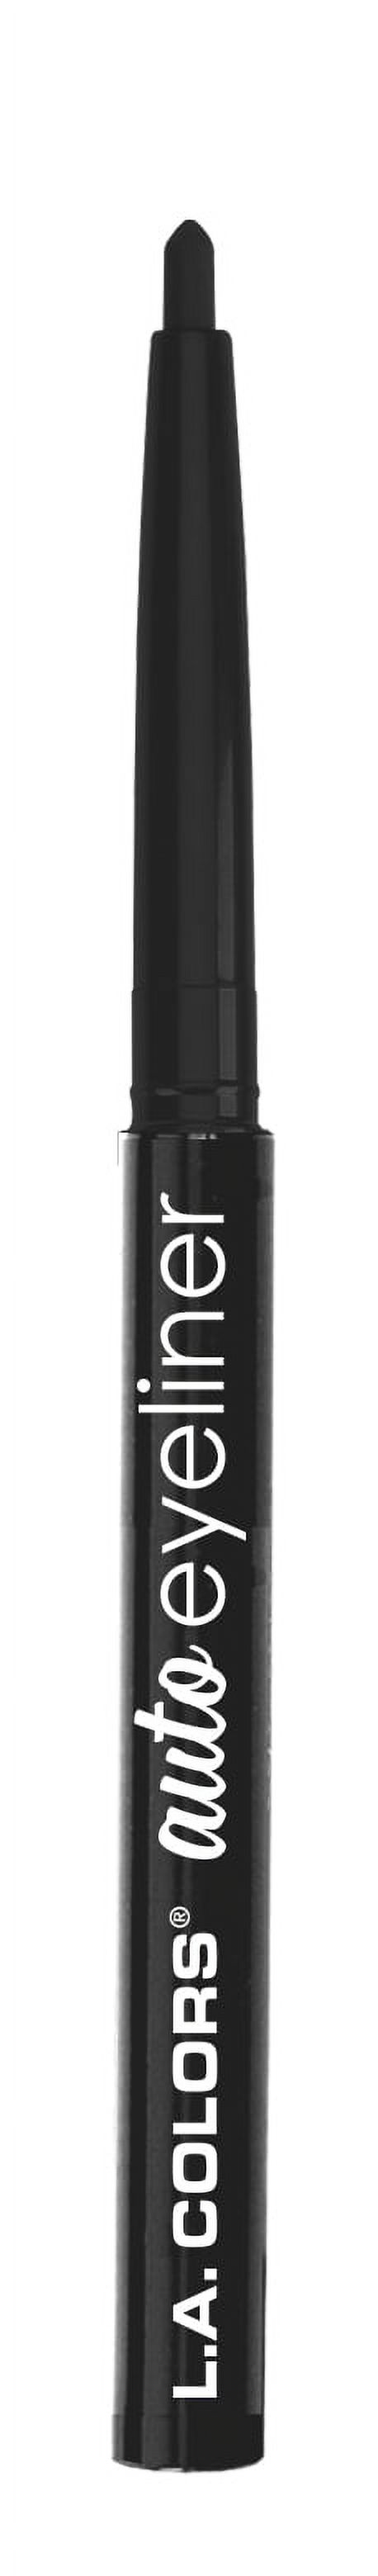 L.A. Colors Auto Eyeliner, Black, 1 Count - image 4 of 4